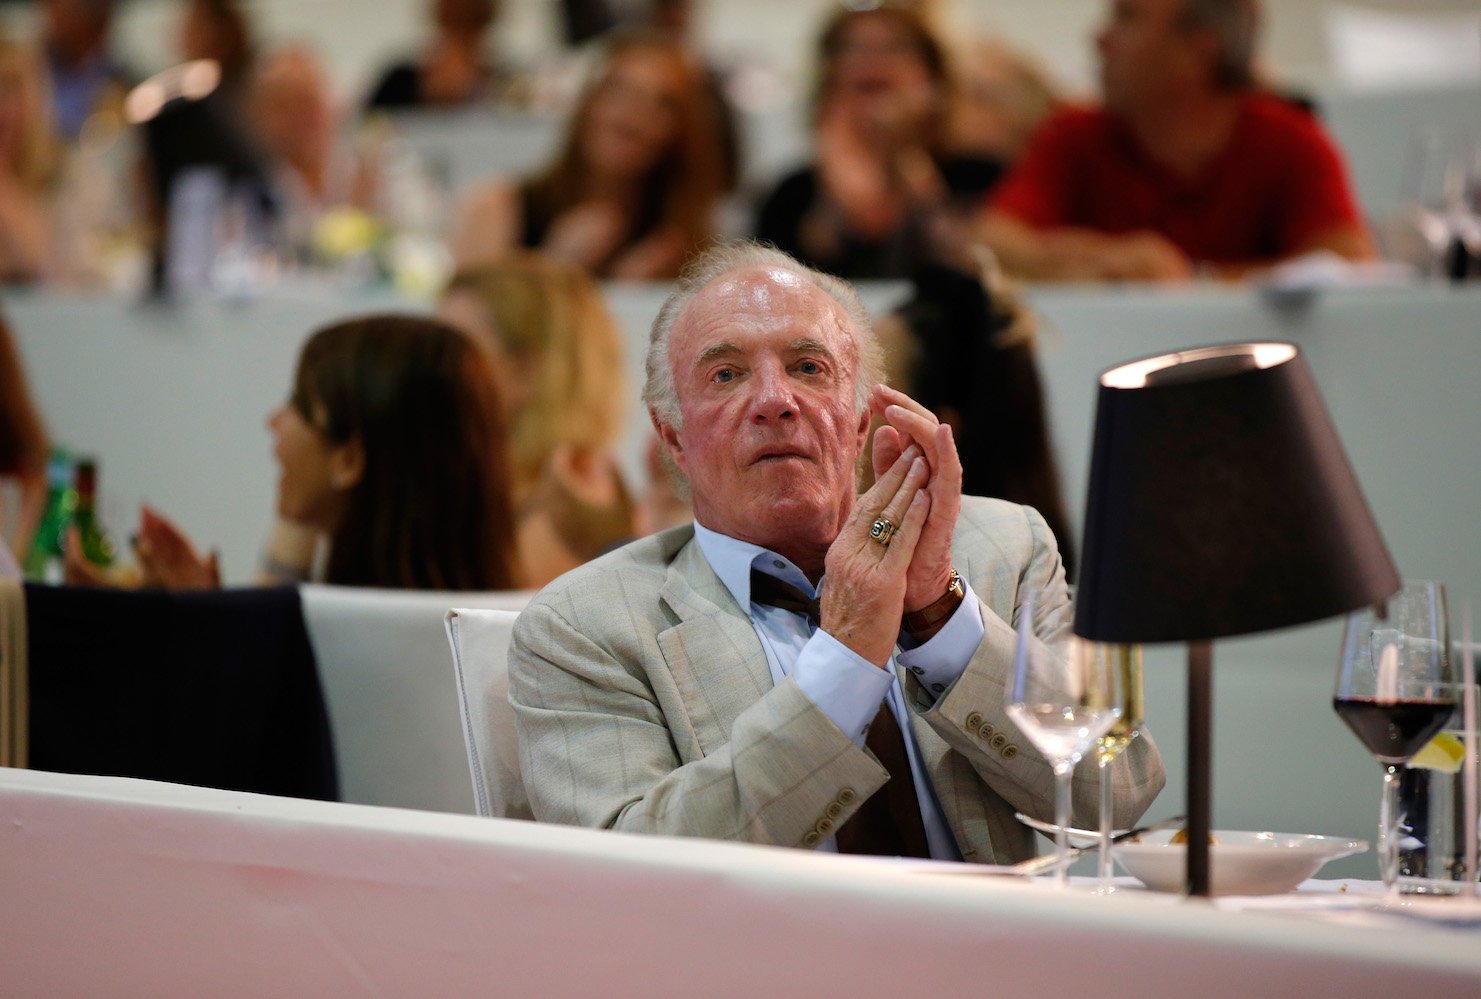 James Caan sitting at a table and clapping